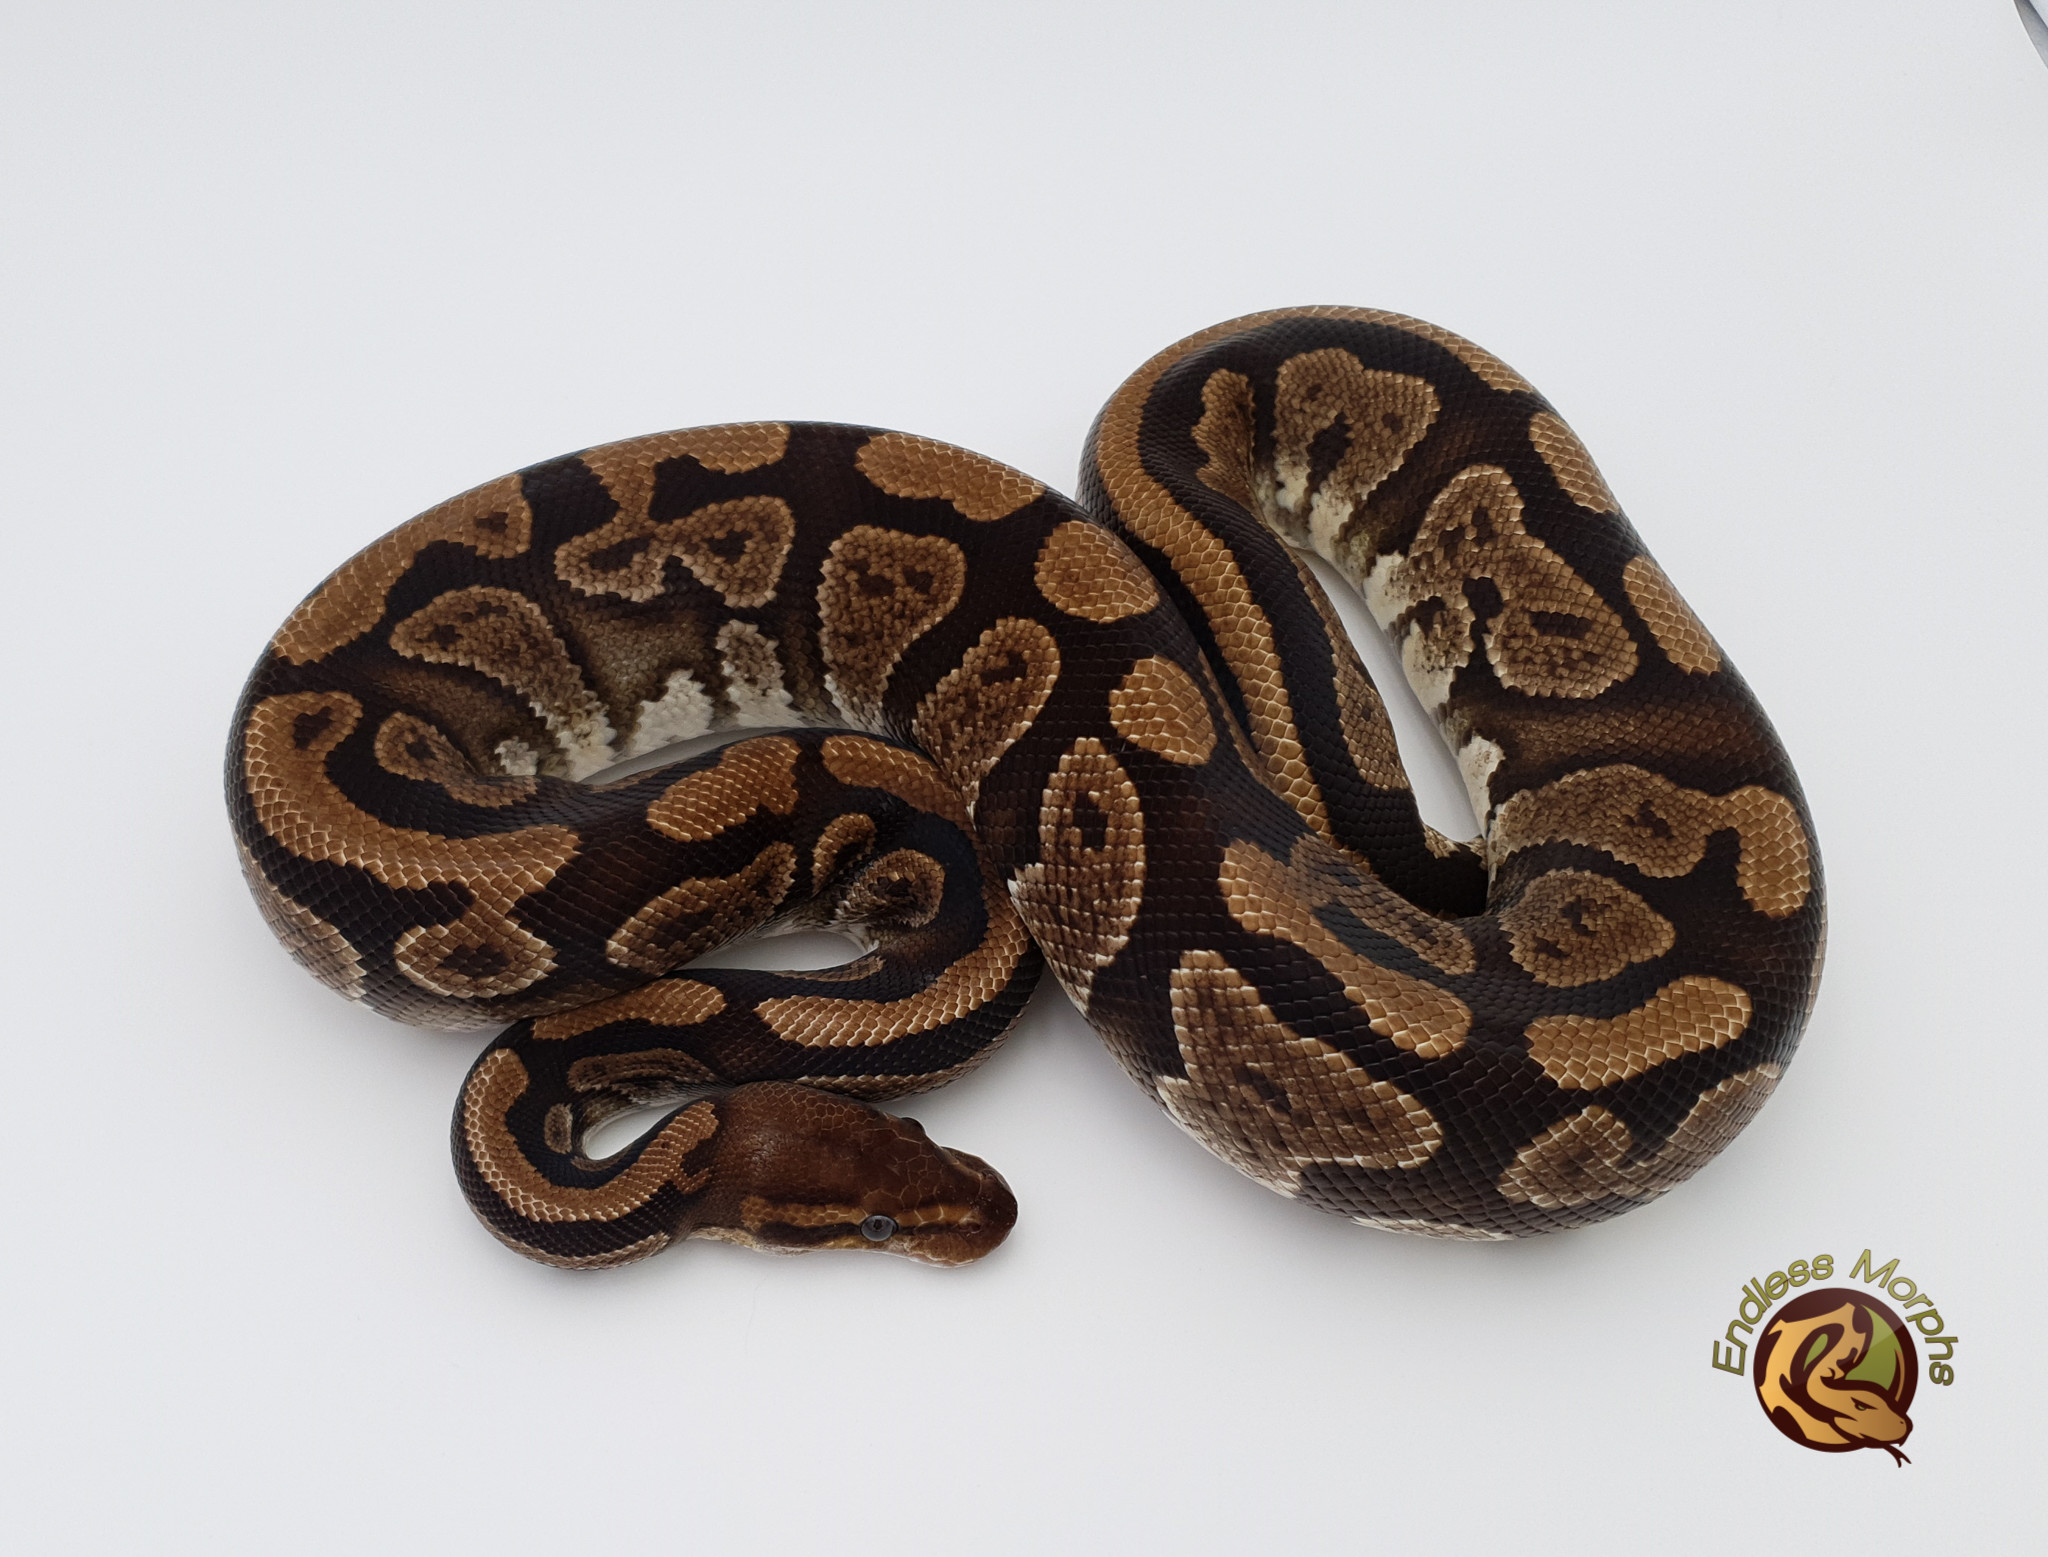 Copper Ball Python by Endless Morphs